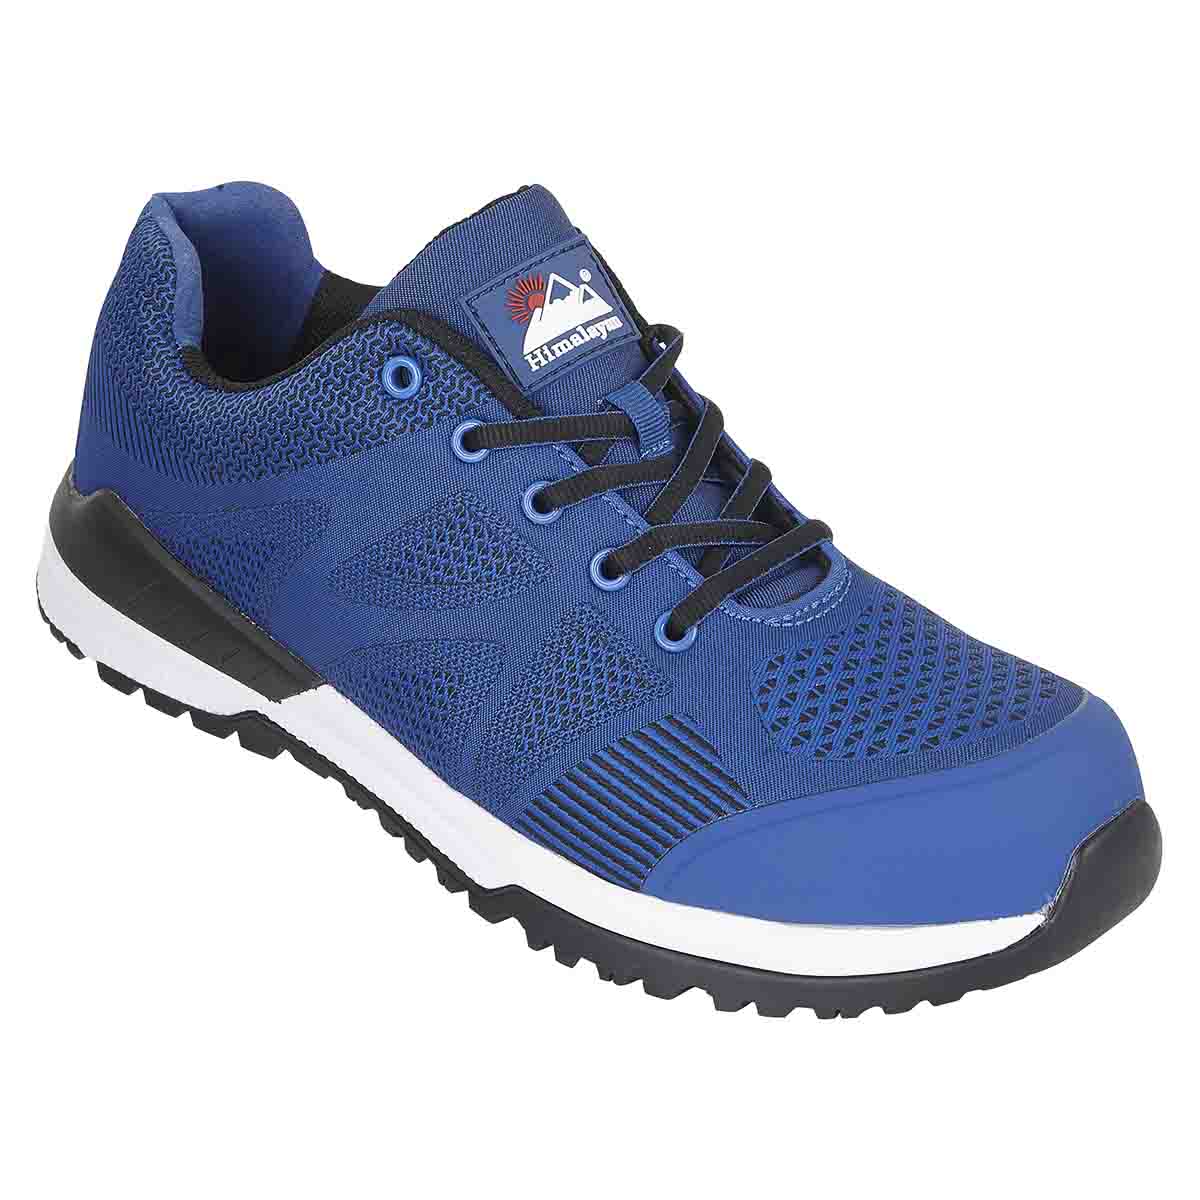 Himalayan 4310 Unisex Blue Toe Capped Safety Trainers, UK 3, EU 36